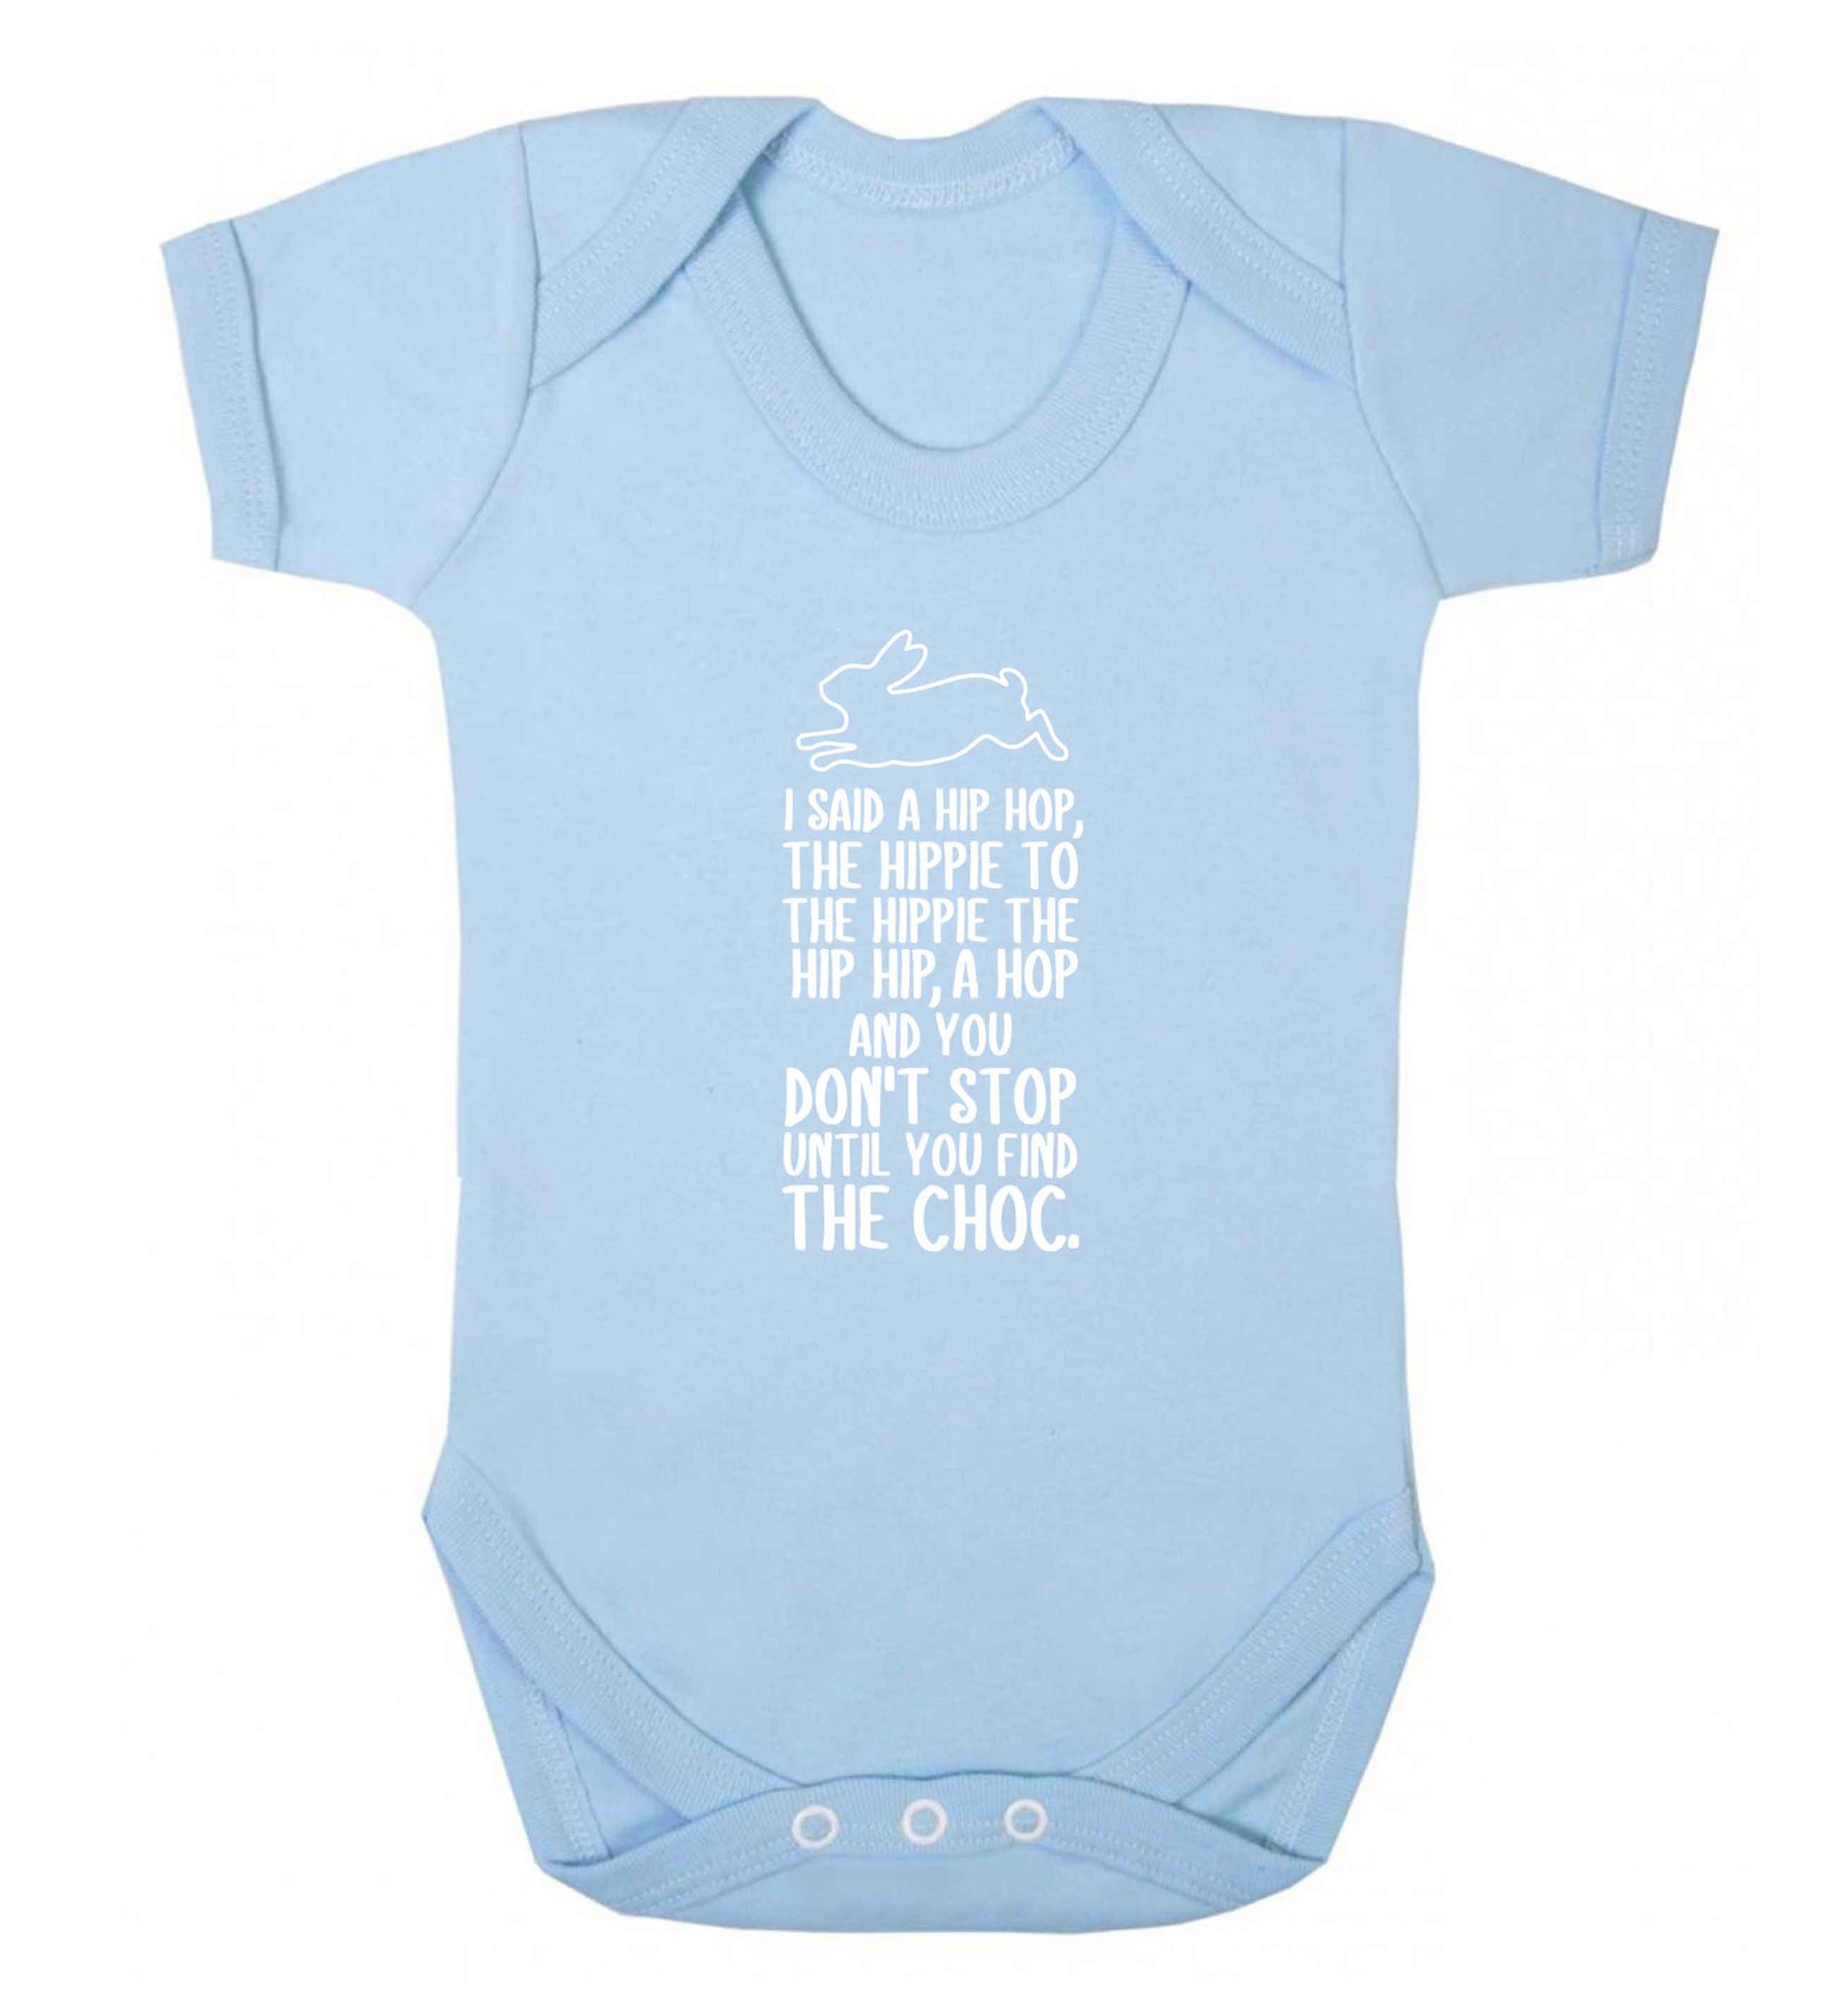 Don't stop until you find the choc baby vest pale blue 18-24 months